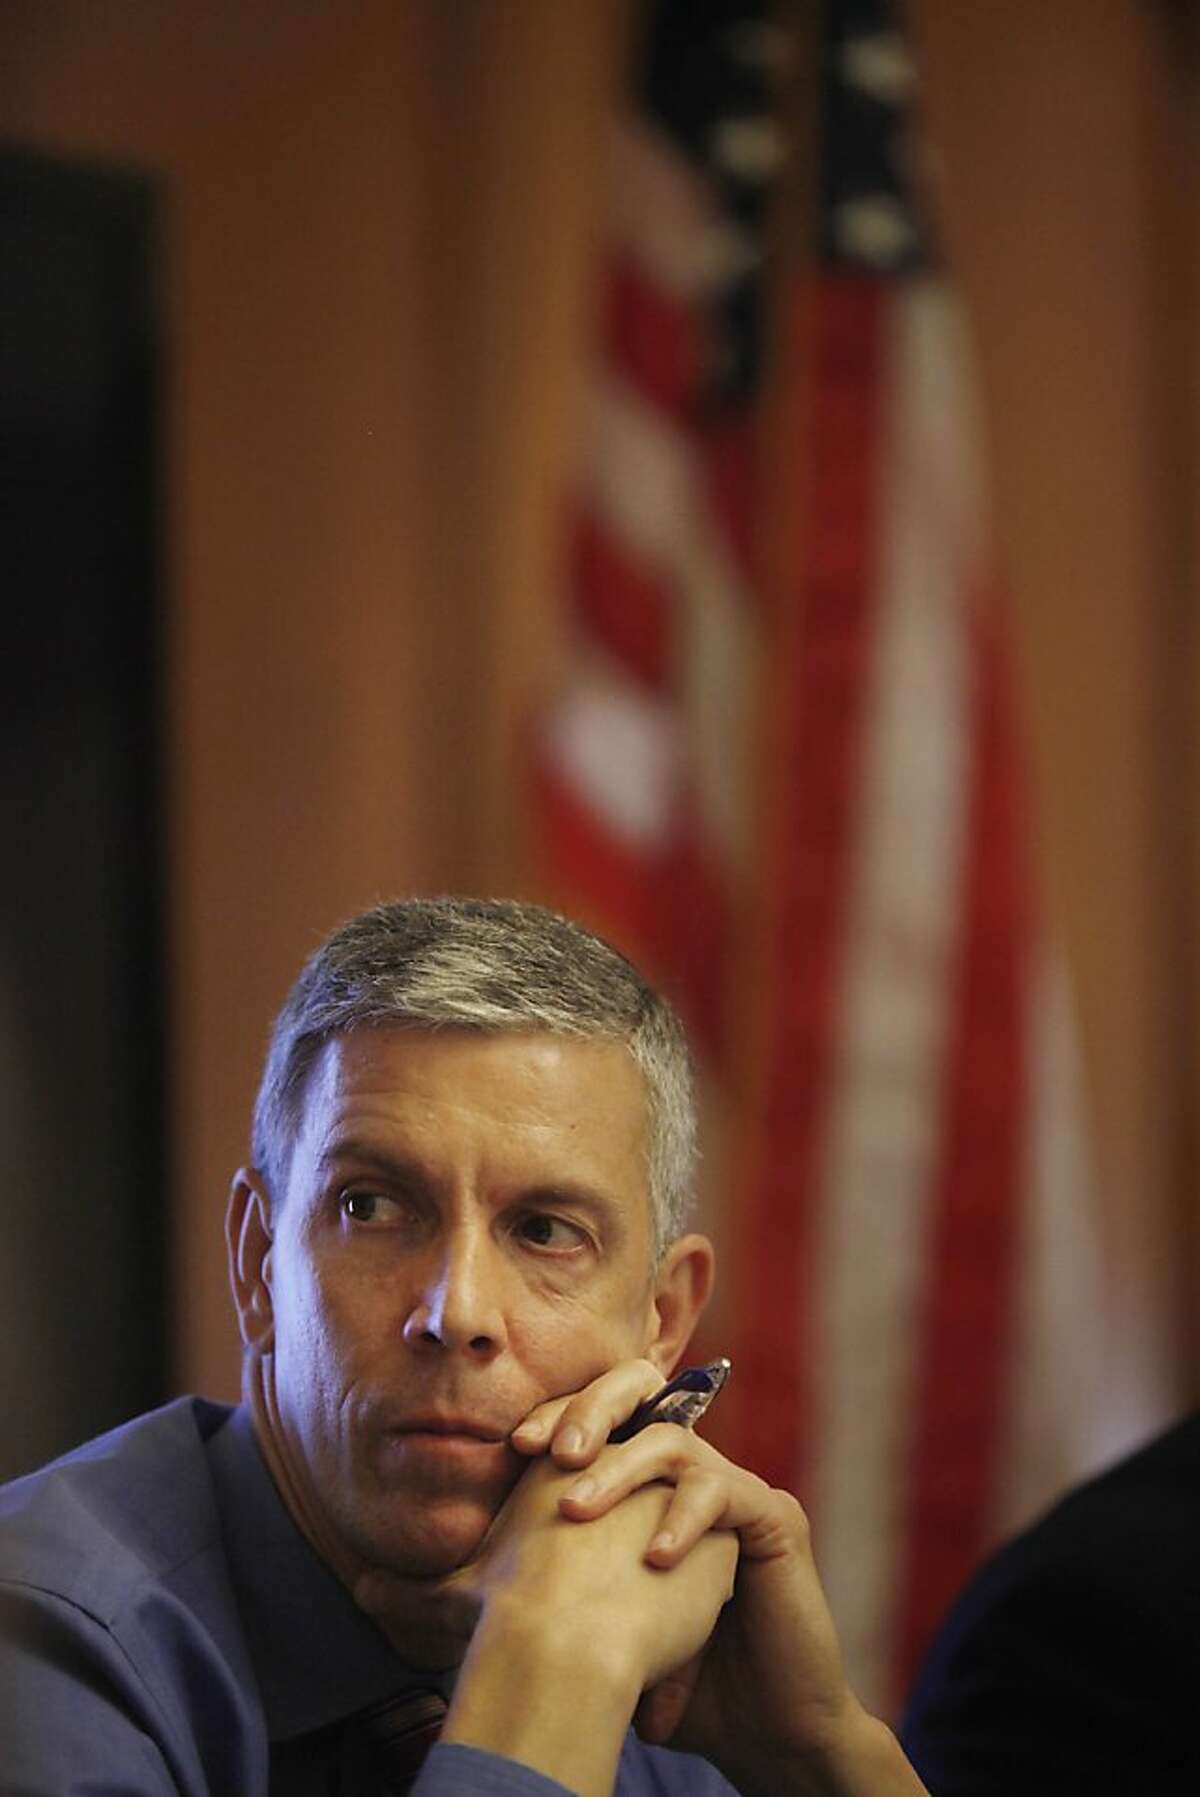 U.S. Secretary of Education Arne Duncan listens to speakers during a roundtable discussion where Mayor Ed Lee and Treasurer Jose Cisneros announced 1,000 savers in Kindergarten to College accounts at City Hall on Friday, June 21, 2013 in San Francisco, Calif.